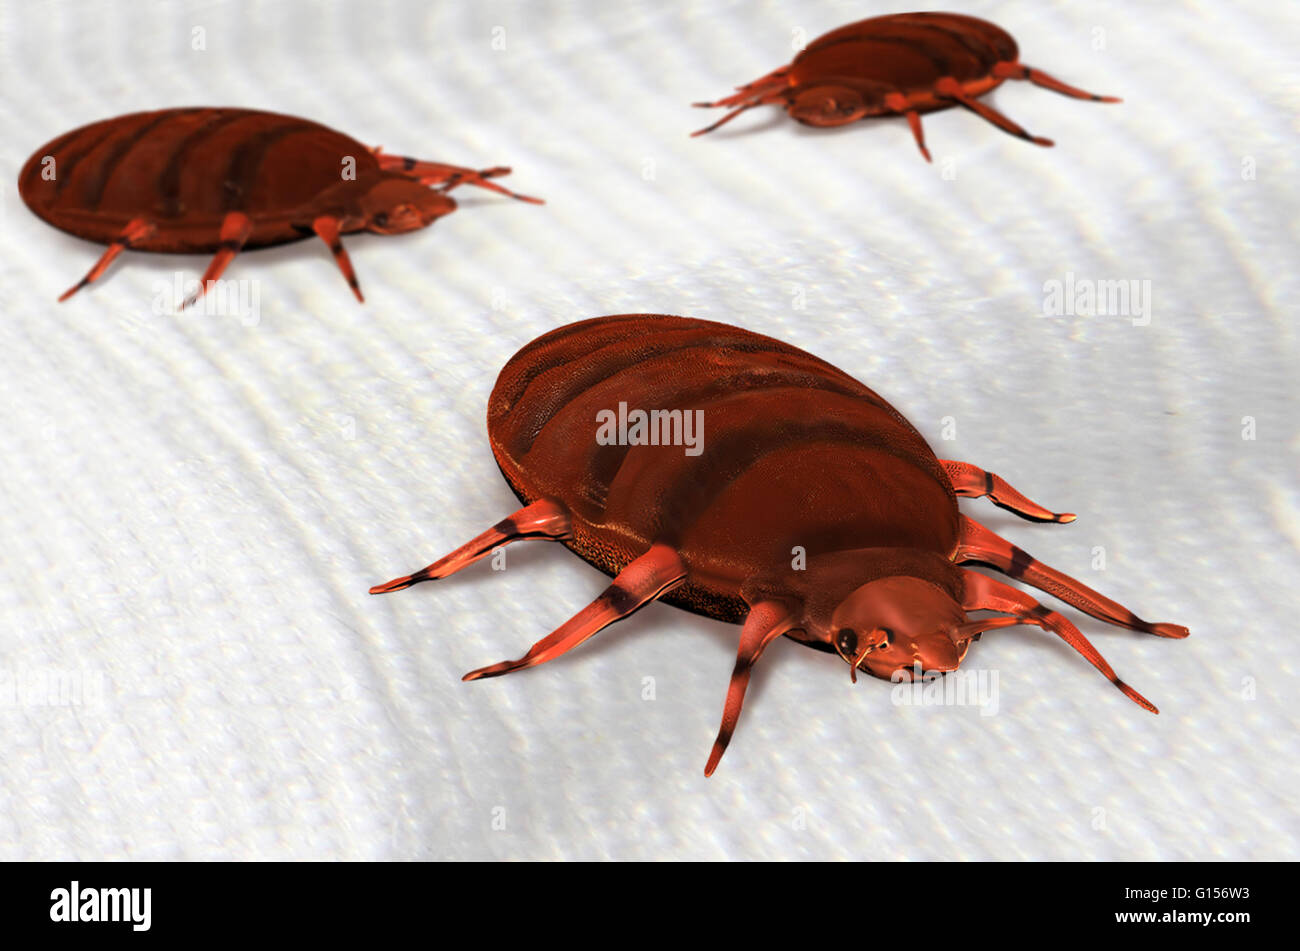 Bedbug (Cimex lectularius), illustration. Bed bugs are not vectors nature of any known human disease. The common bed bug is found worldwide. Infestations are common in the developing world, occurring in